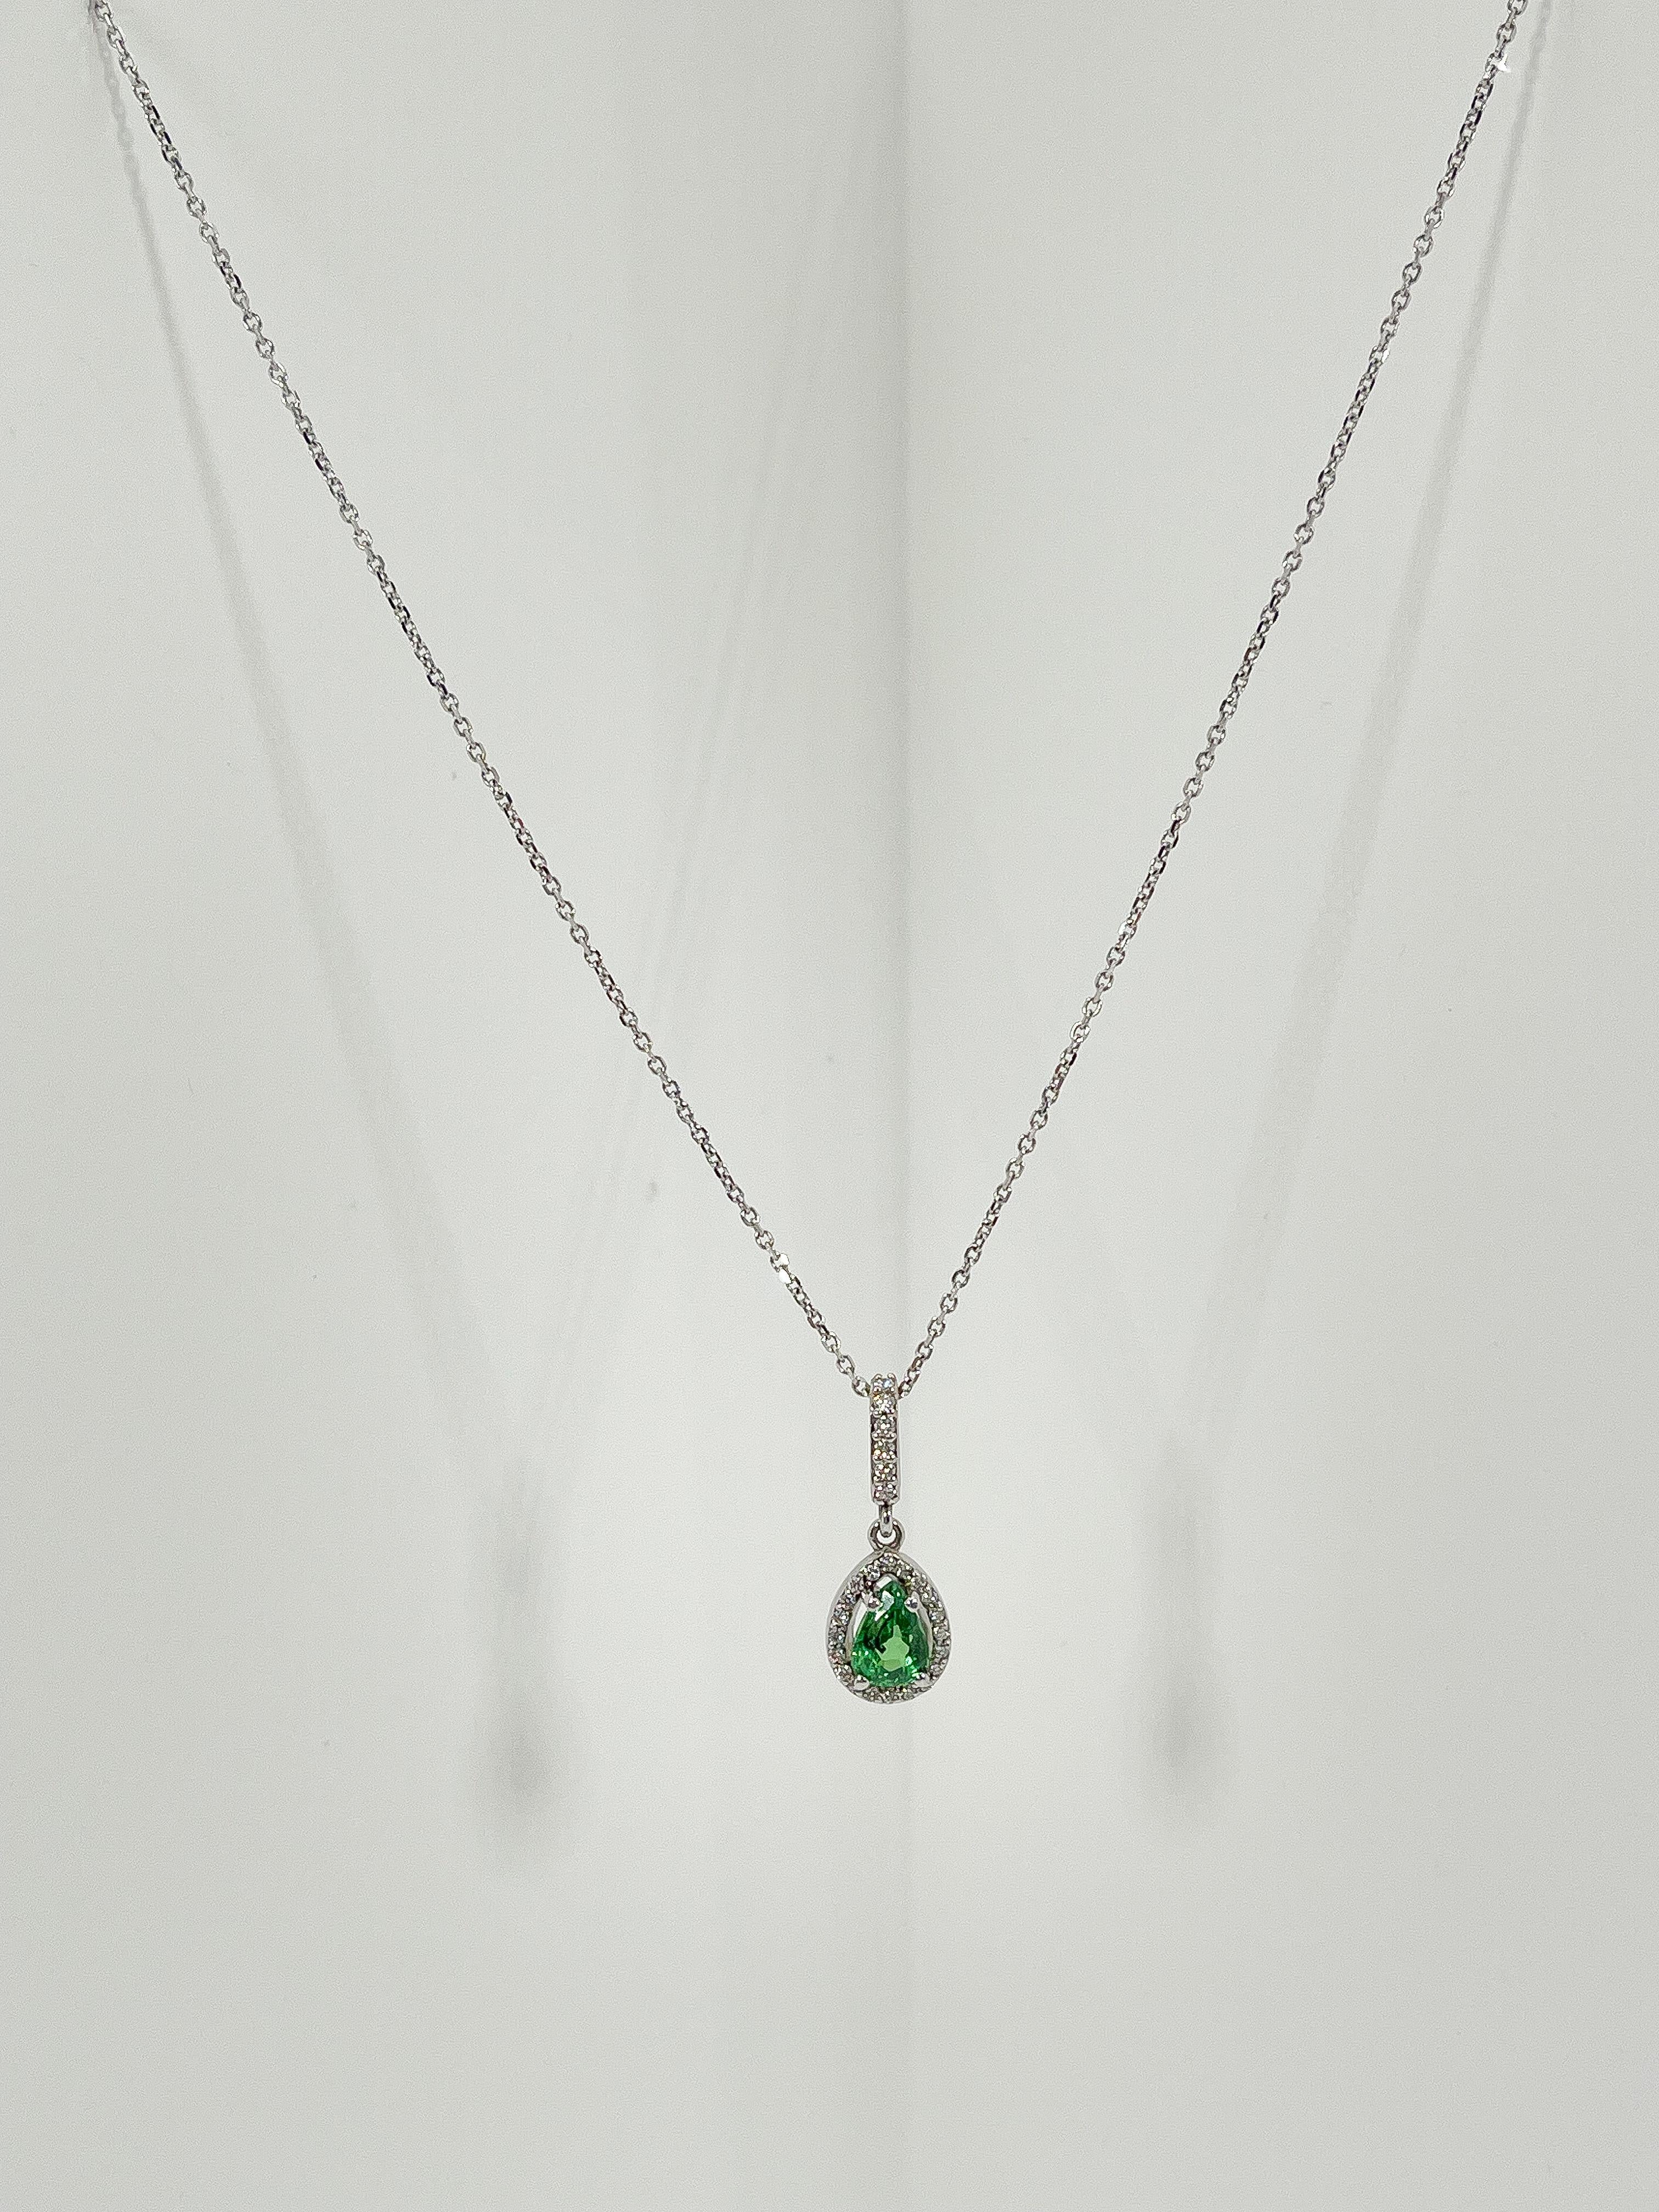 14k white gold 1 CT pear tsavorite and diamond halo necklace. All diamonds are round, the length of the necklace is 18 inches, the pendant measures 8mm x 10mm without bail, has a lobster clasp to open and close, has a total weight of 3.2 grams.